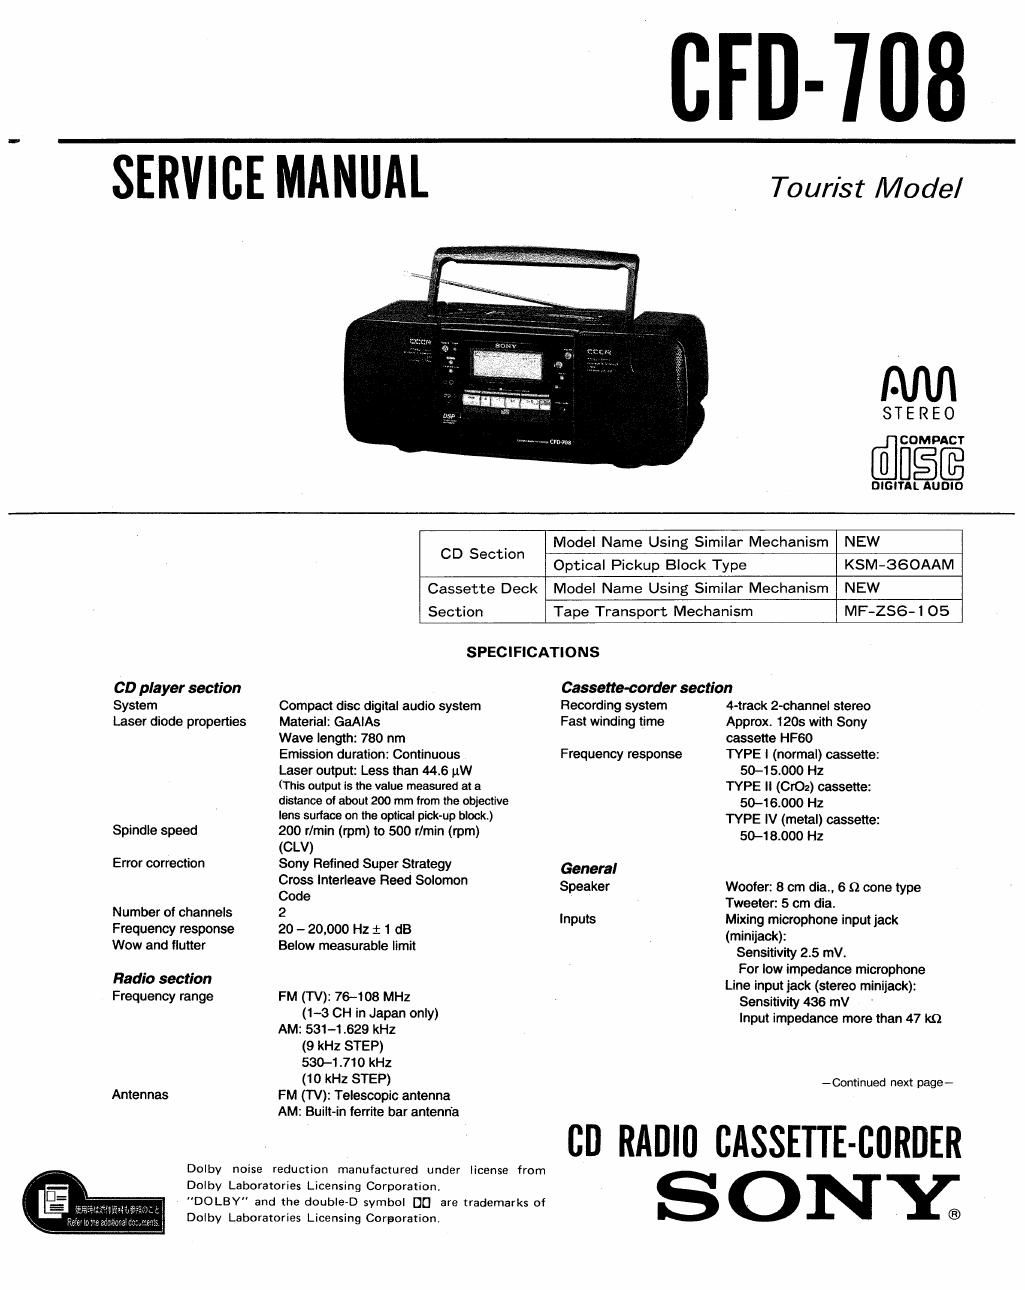 sony cfd 708 service manual